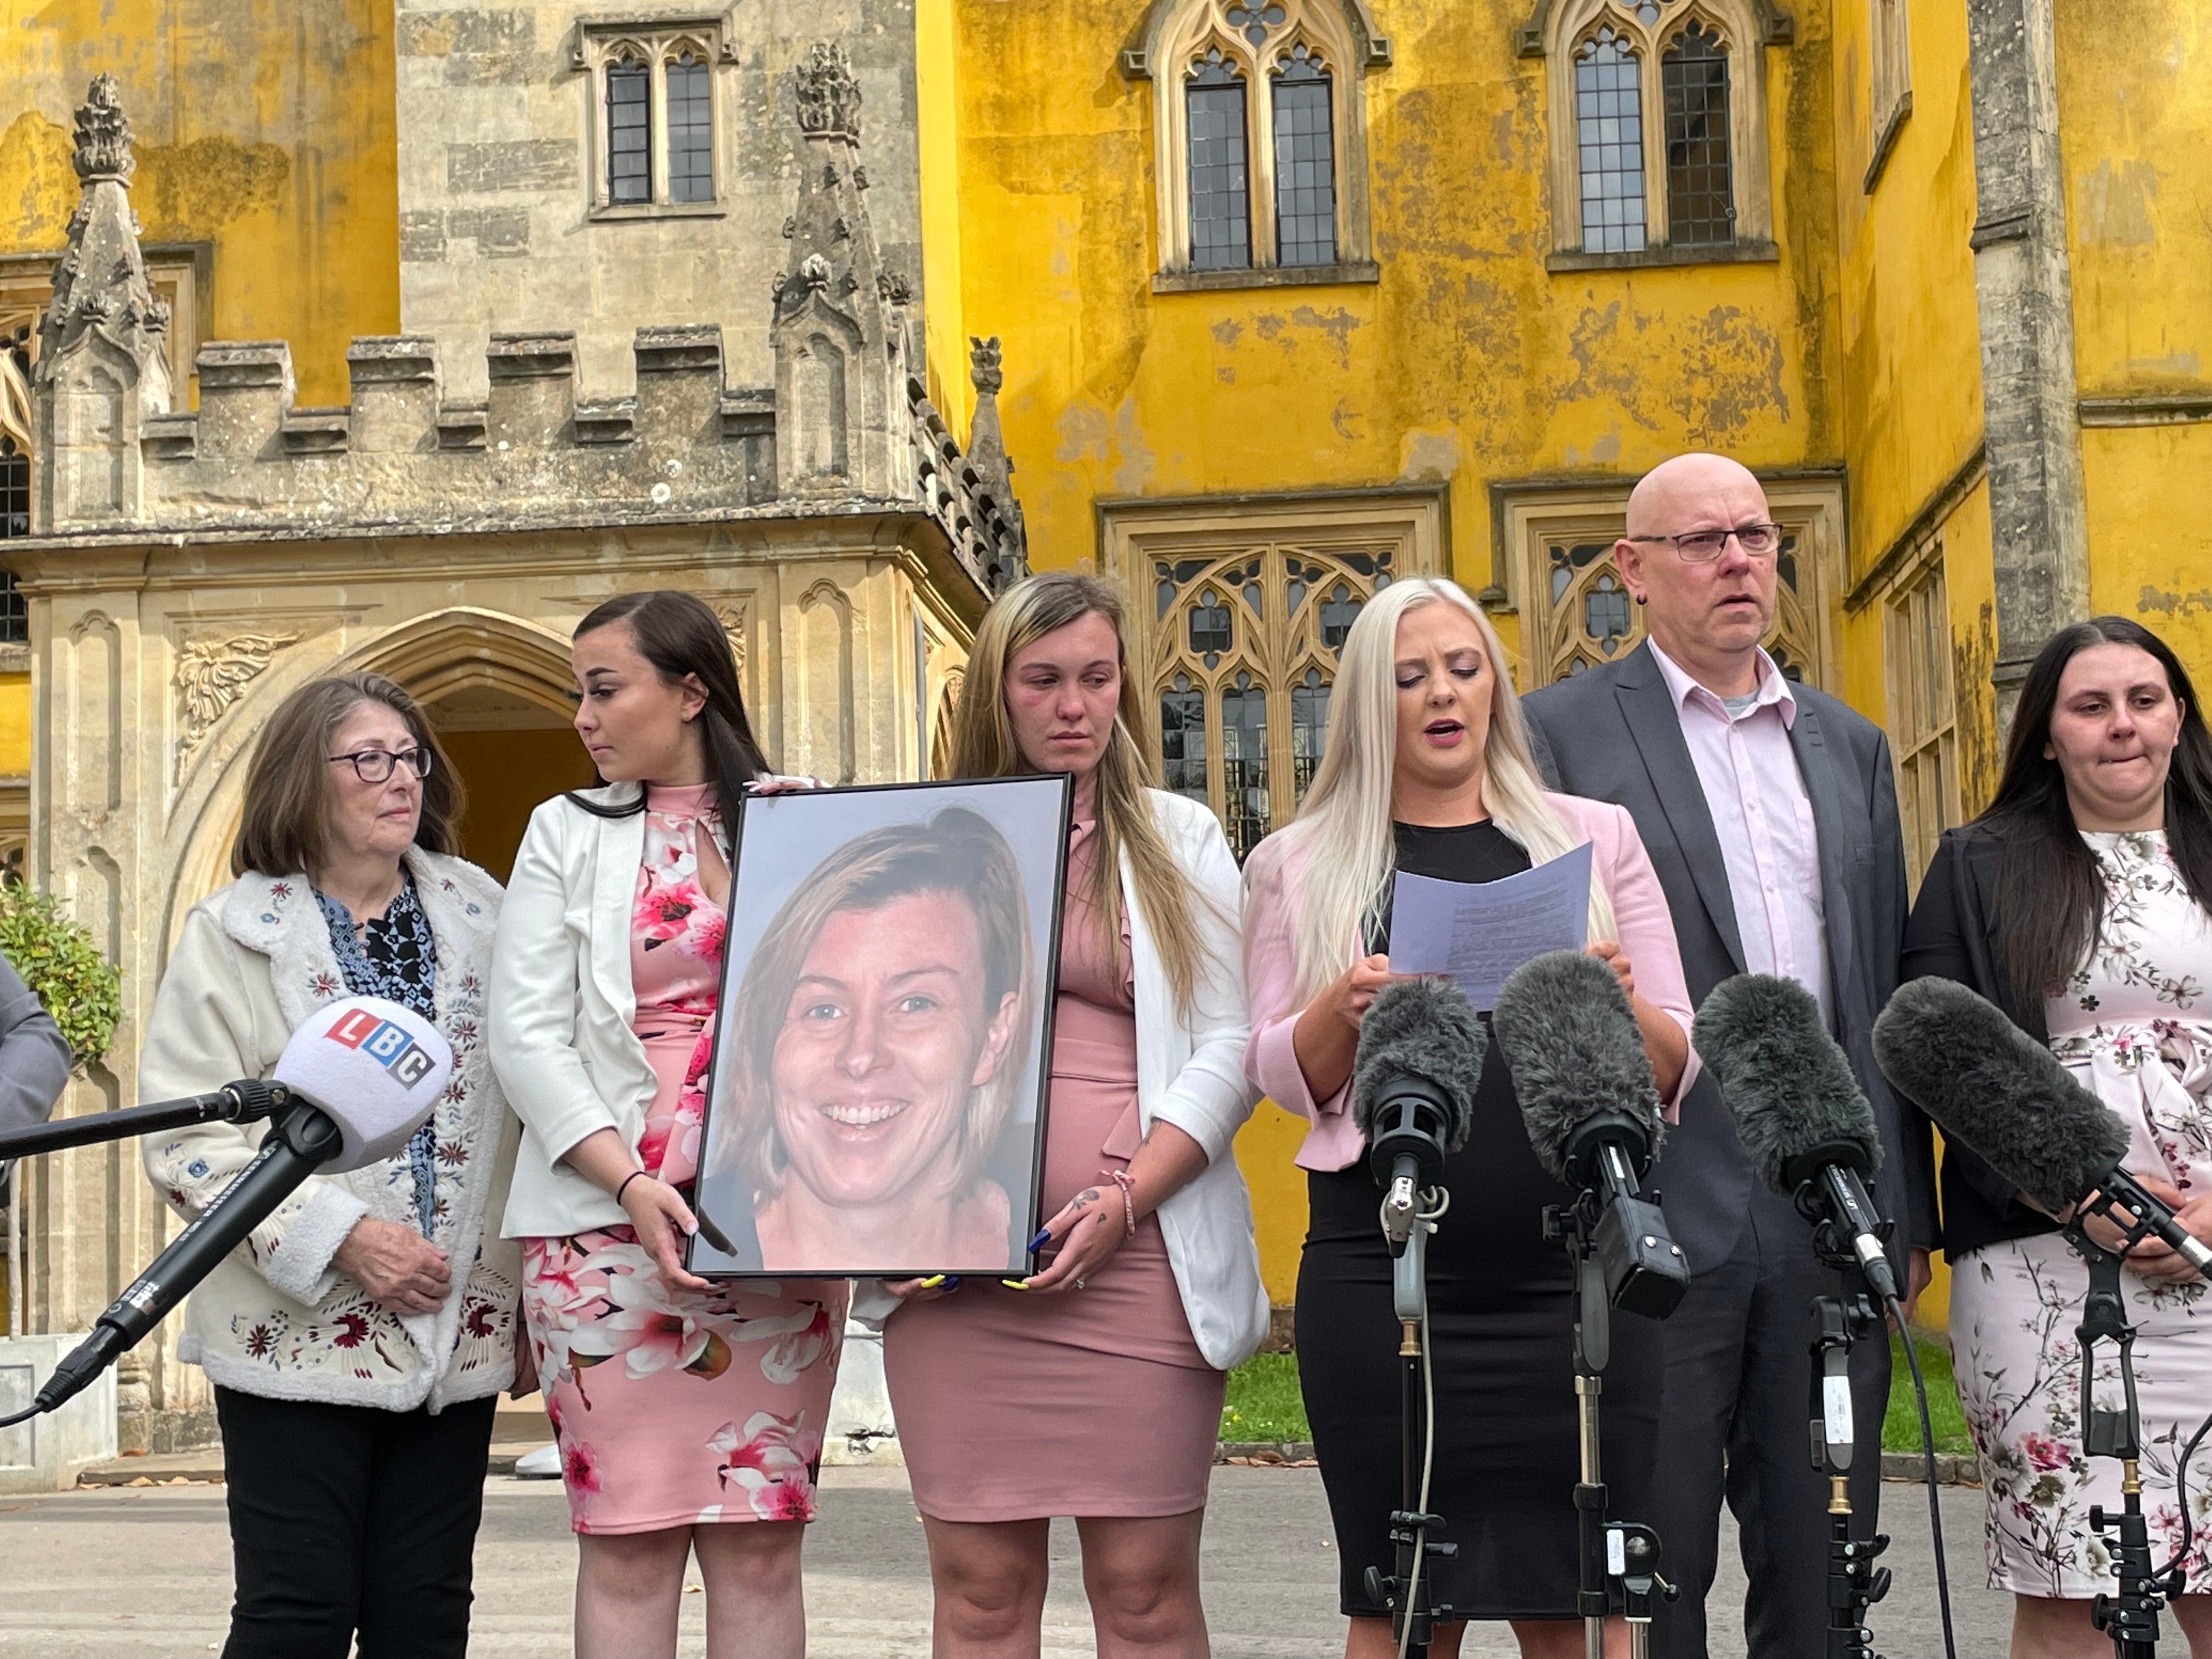 Family of Celia Marsh, (from left) Mrs Marsh’s mother Jen Gower, Mrs Marsh’s daughters Kayleigh Grice, Brenna Grice, Ashleigh Grice (speaking), Mrs Marsh’s husband Andy Marsh, and her daughter Shanaye Grice, outside Avon Coroner’s Court in Bristol following the inquest into her death (Tess de la Mare/PA)